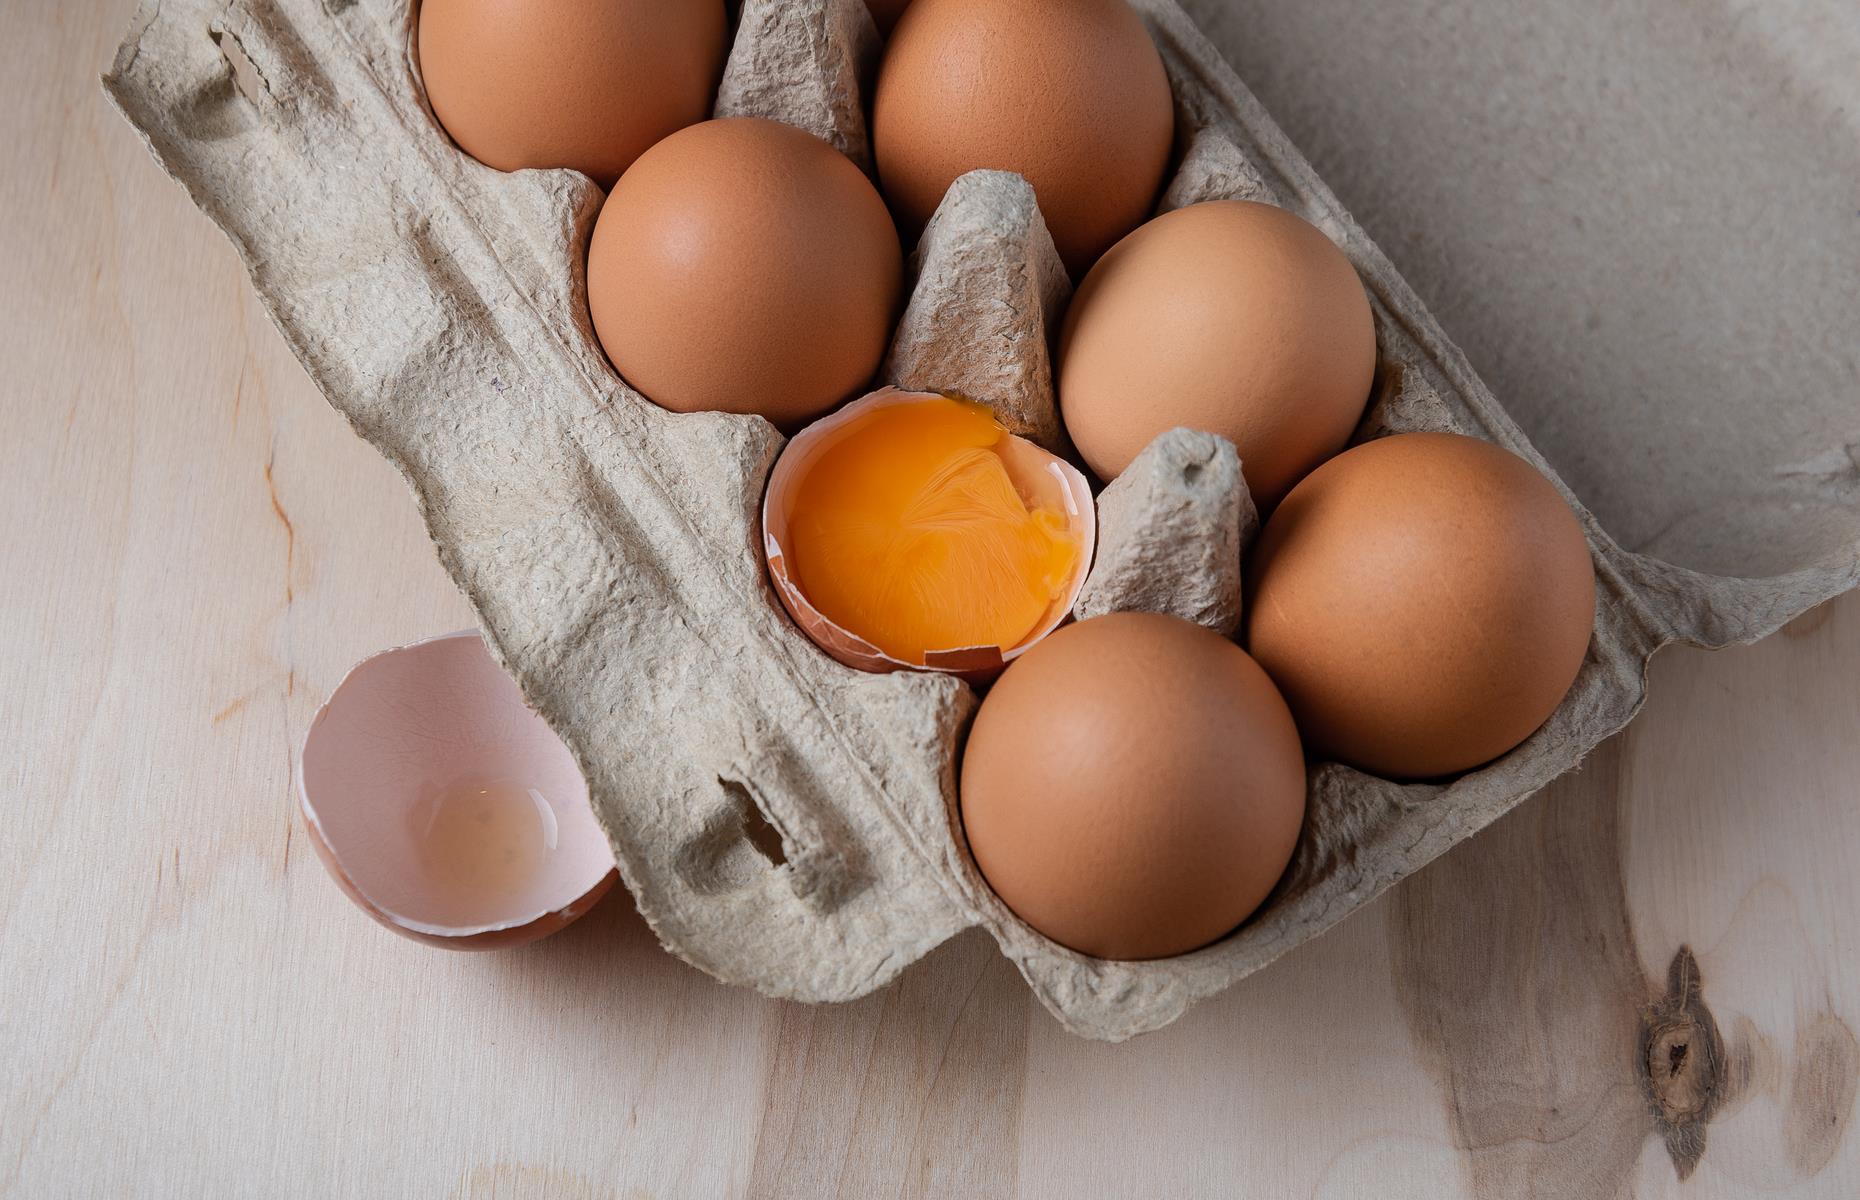 Lightly beat some eggs and store them in a water bottle or flask. It saves worrying about your pack getting smashed and it’s ready to cook for breakfast or a suppertime omelet.